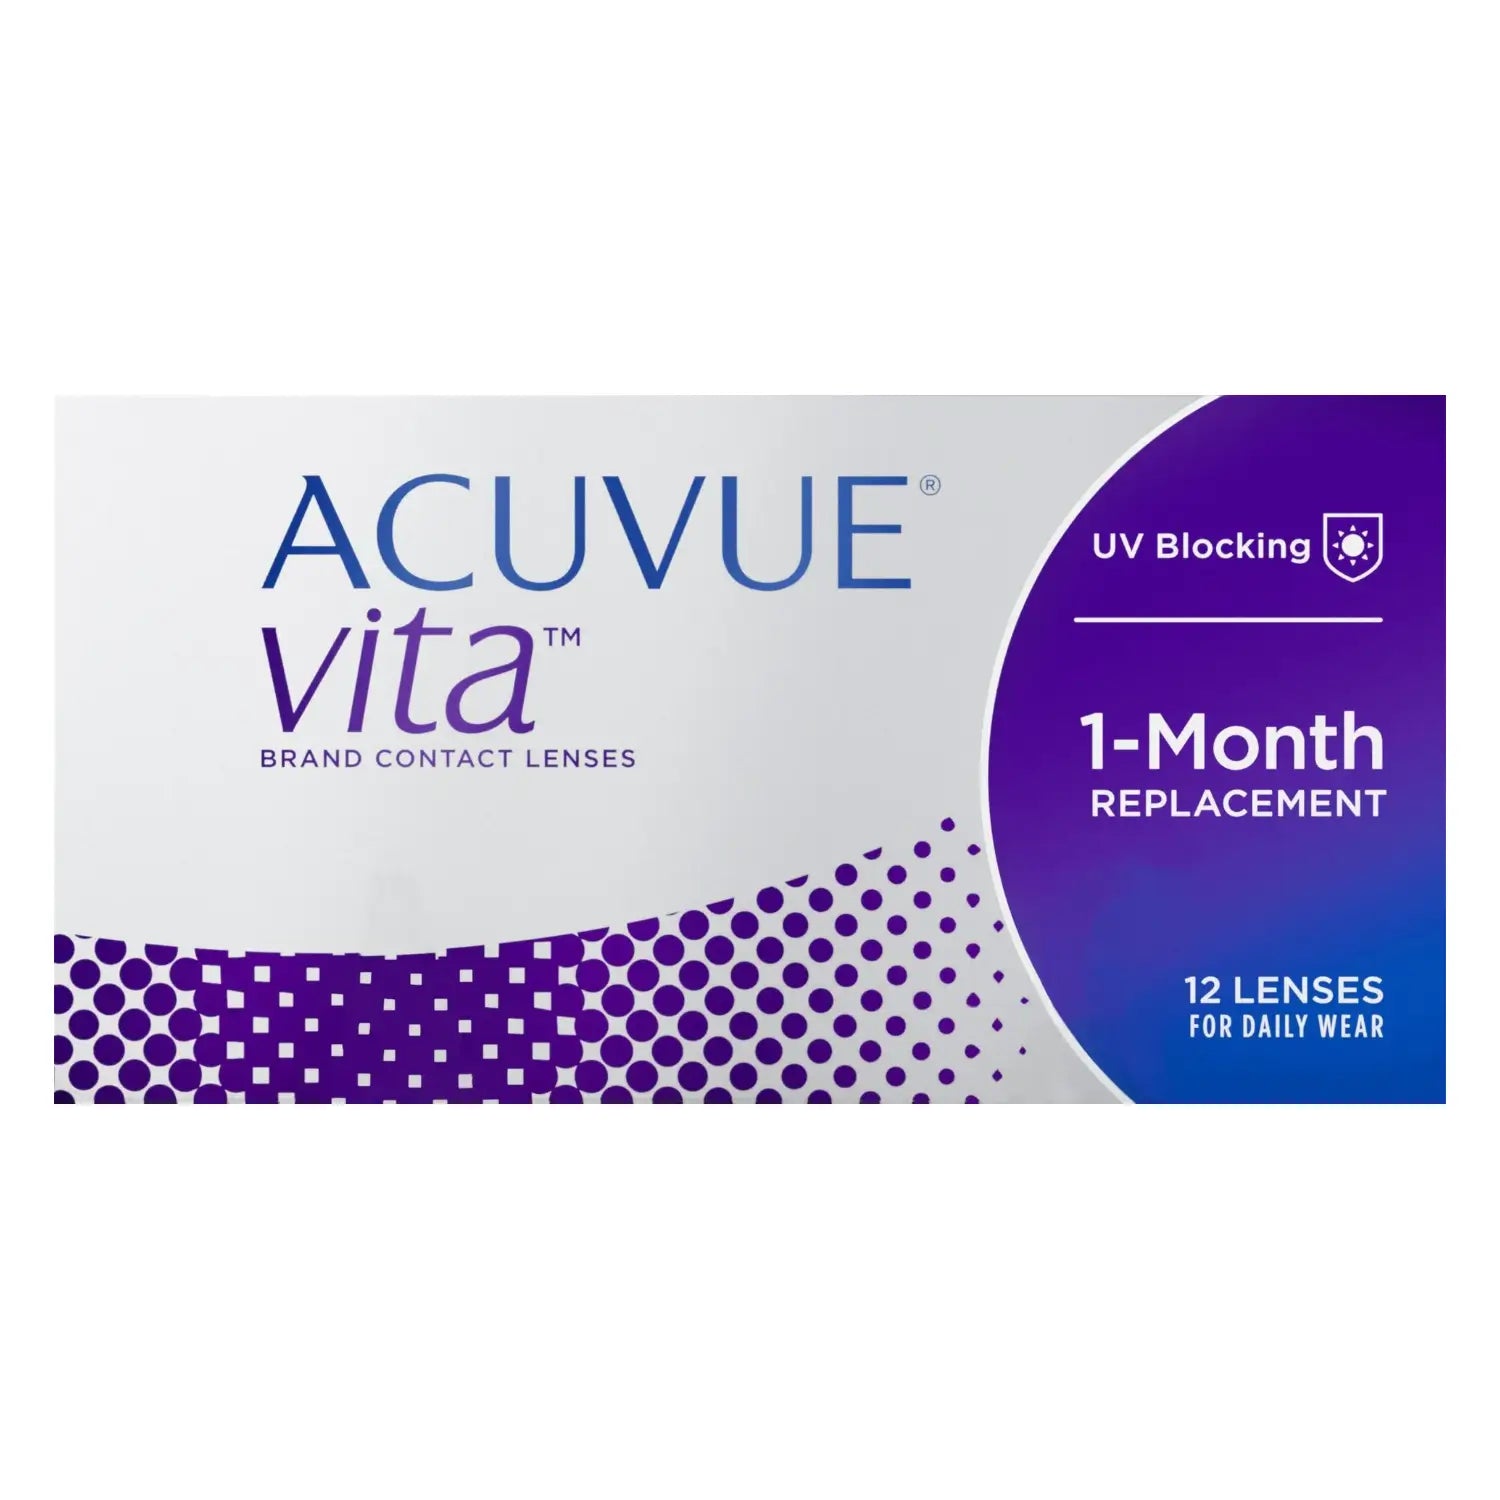 Acuvue Vita certified contact lenses online at best price